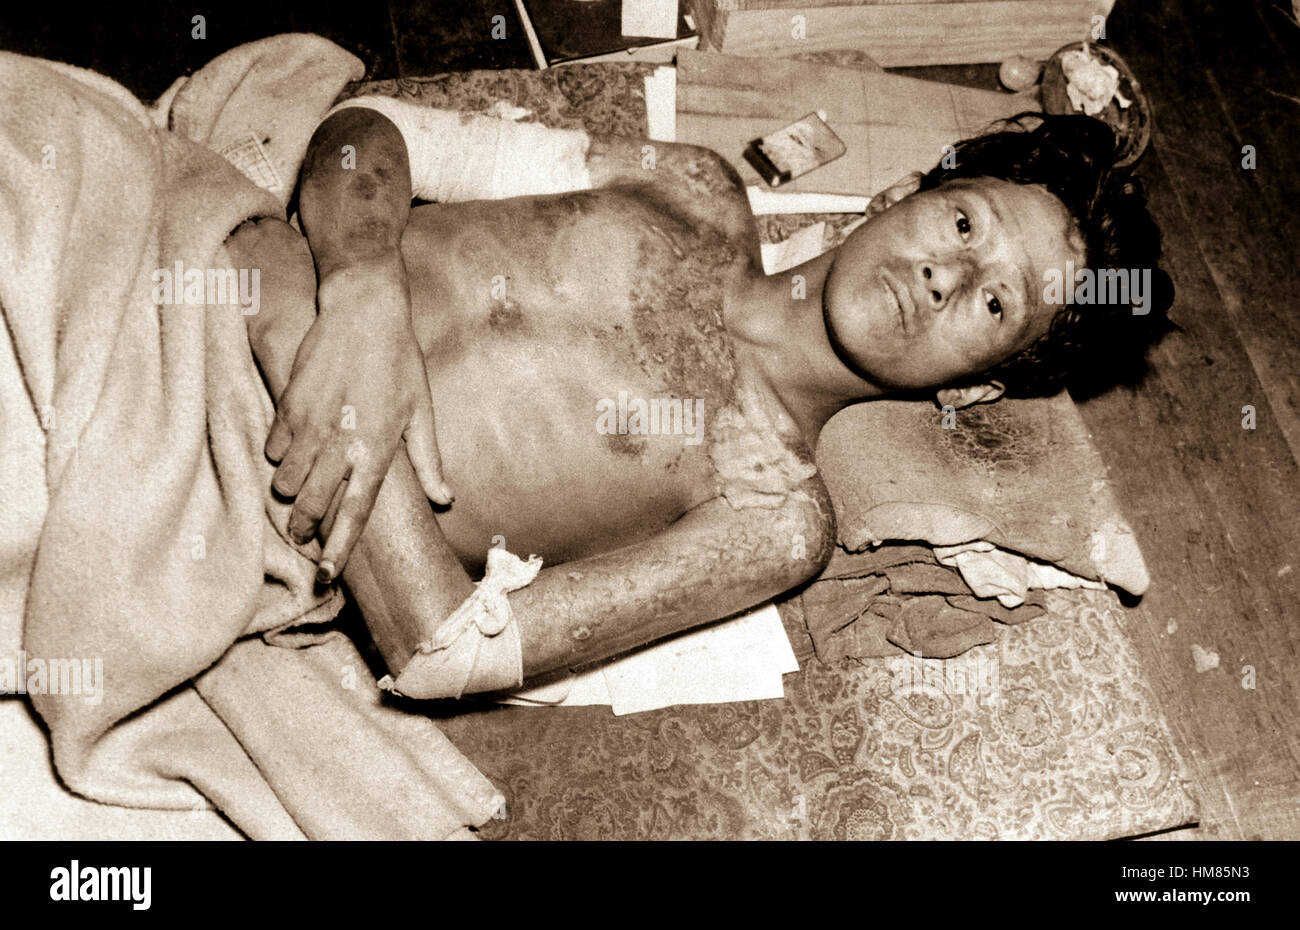 Victim of the Atom Bomb Explosion over Nagasaki.  Ca.  1945. (Corps of Engineers) Exact Date Shot Unknown NARA FILE #:  077-AEC-48-27 WAR & CONFLICT BOOK #:  1245 Stock Photo